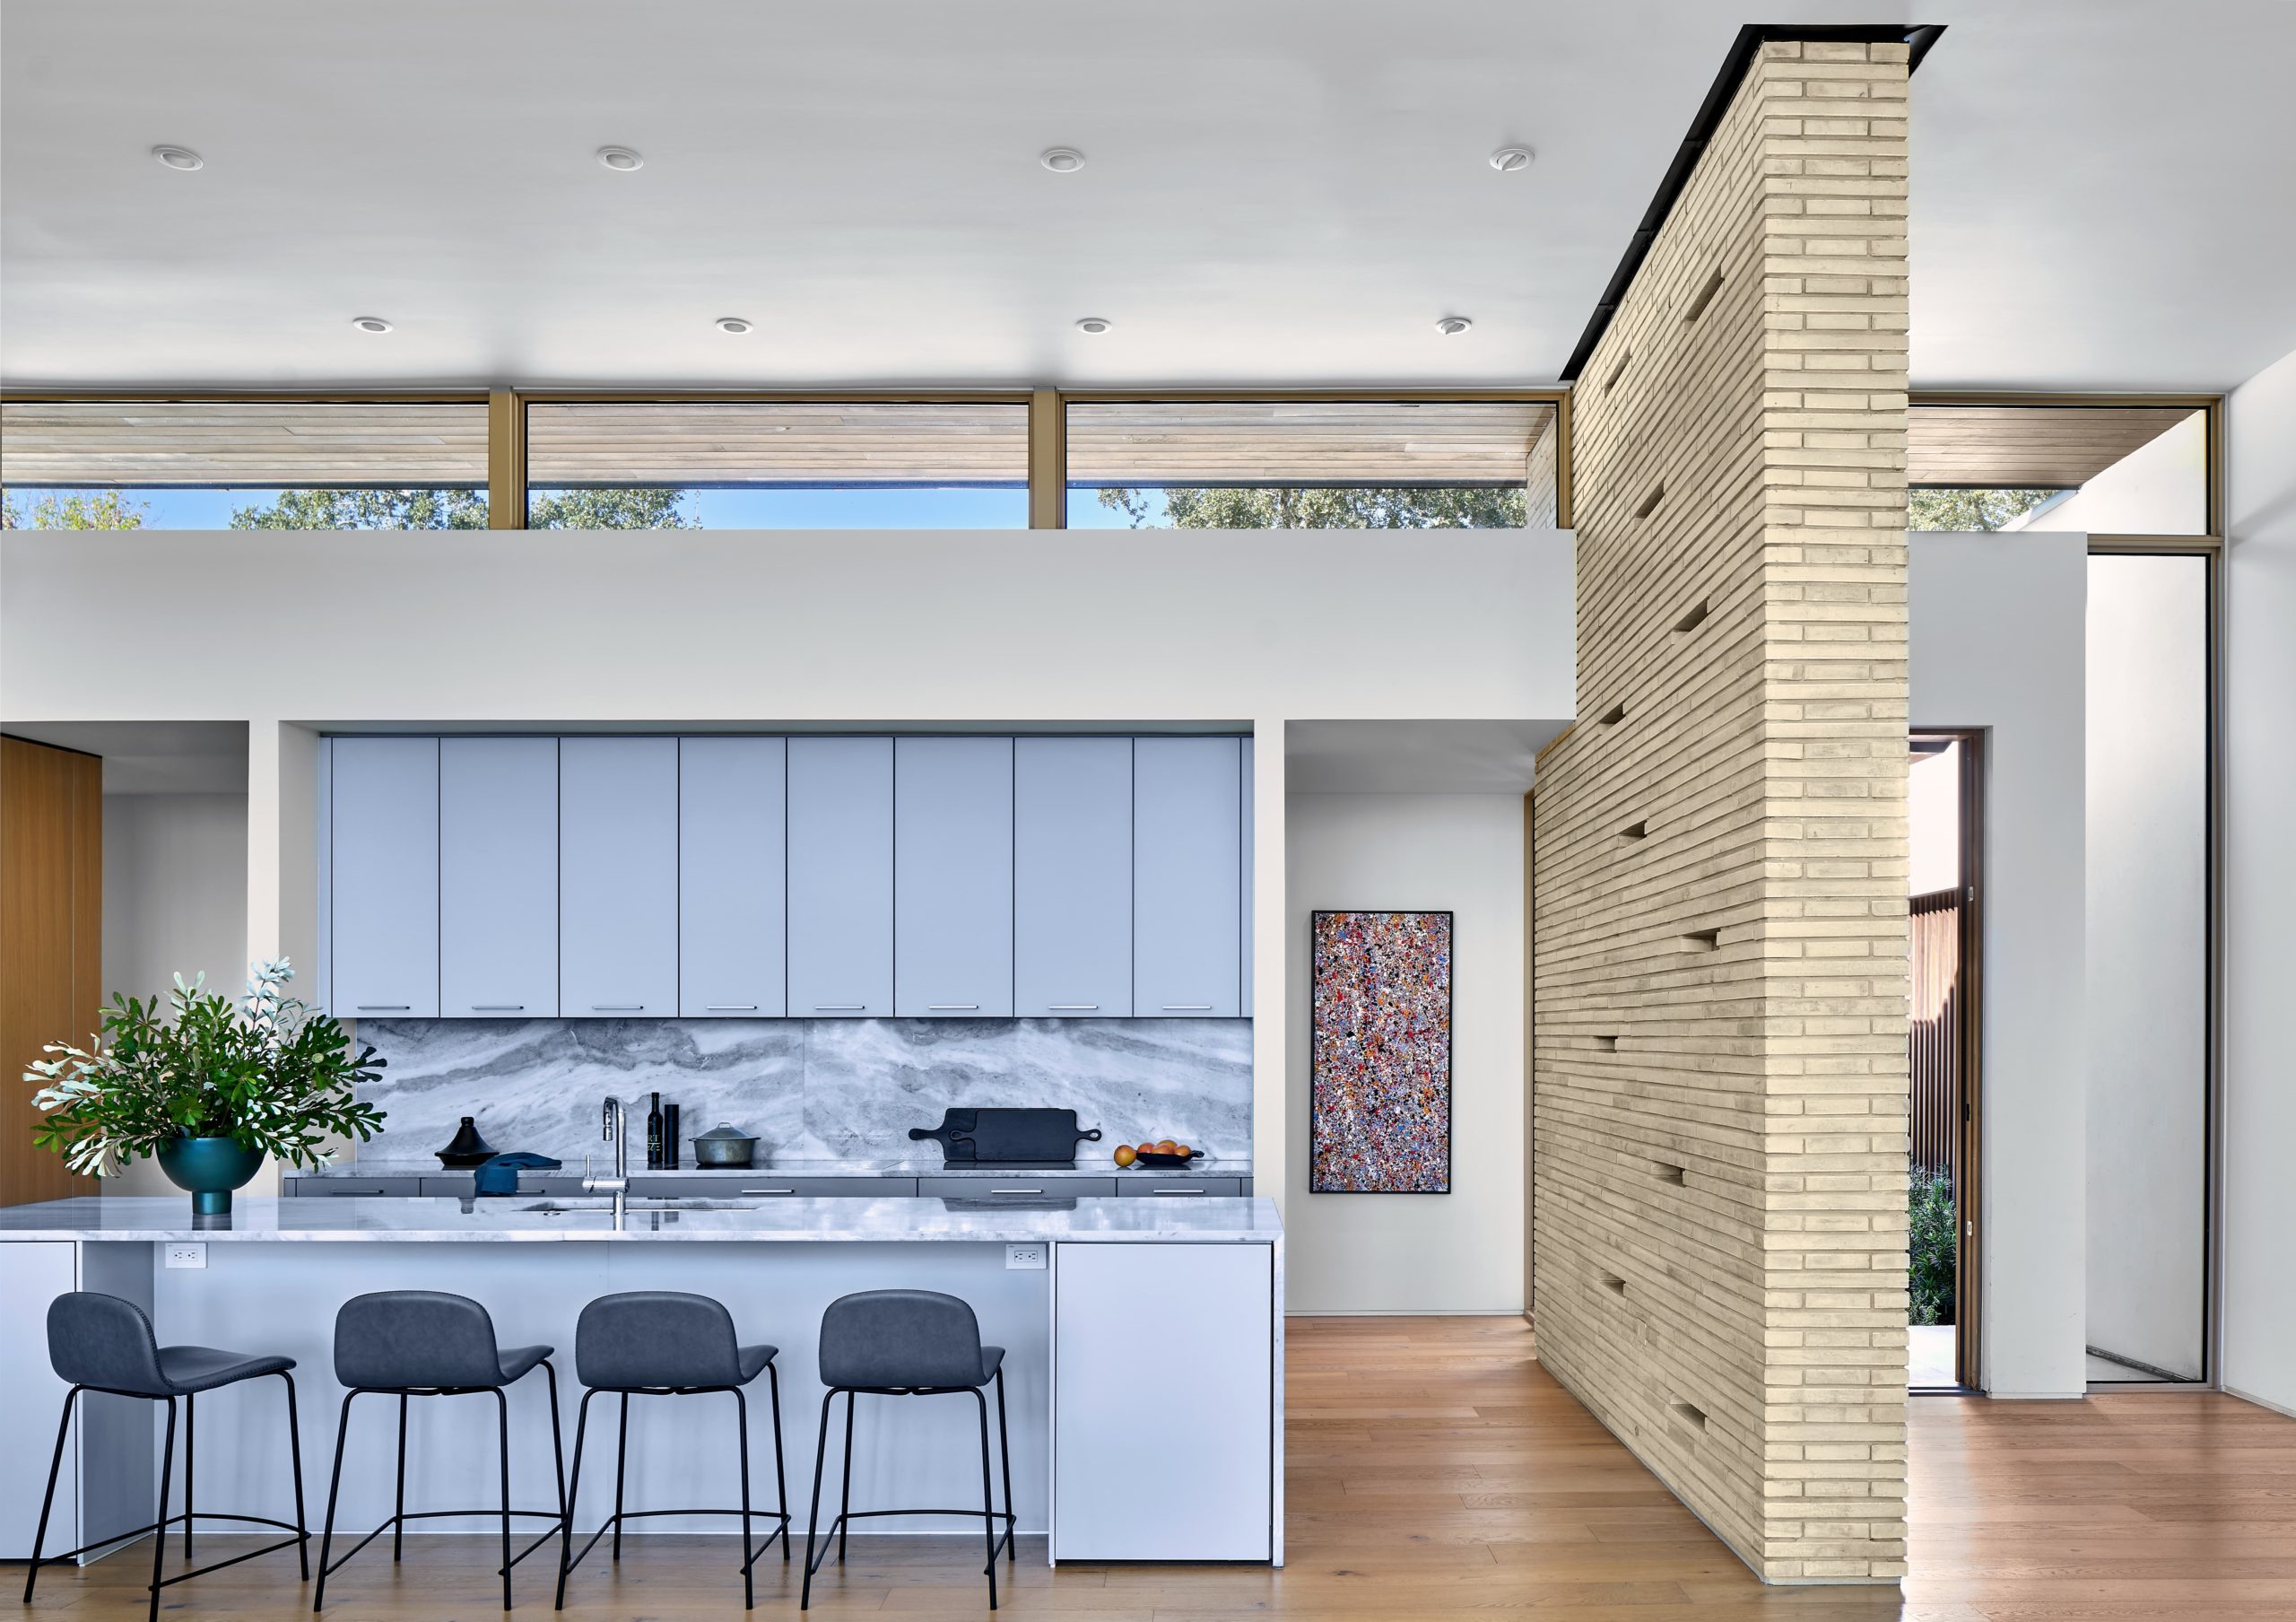 View of Kitchen Crestway Residence by Jay Corder Architect